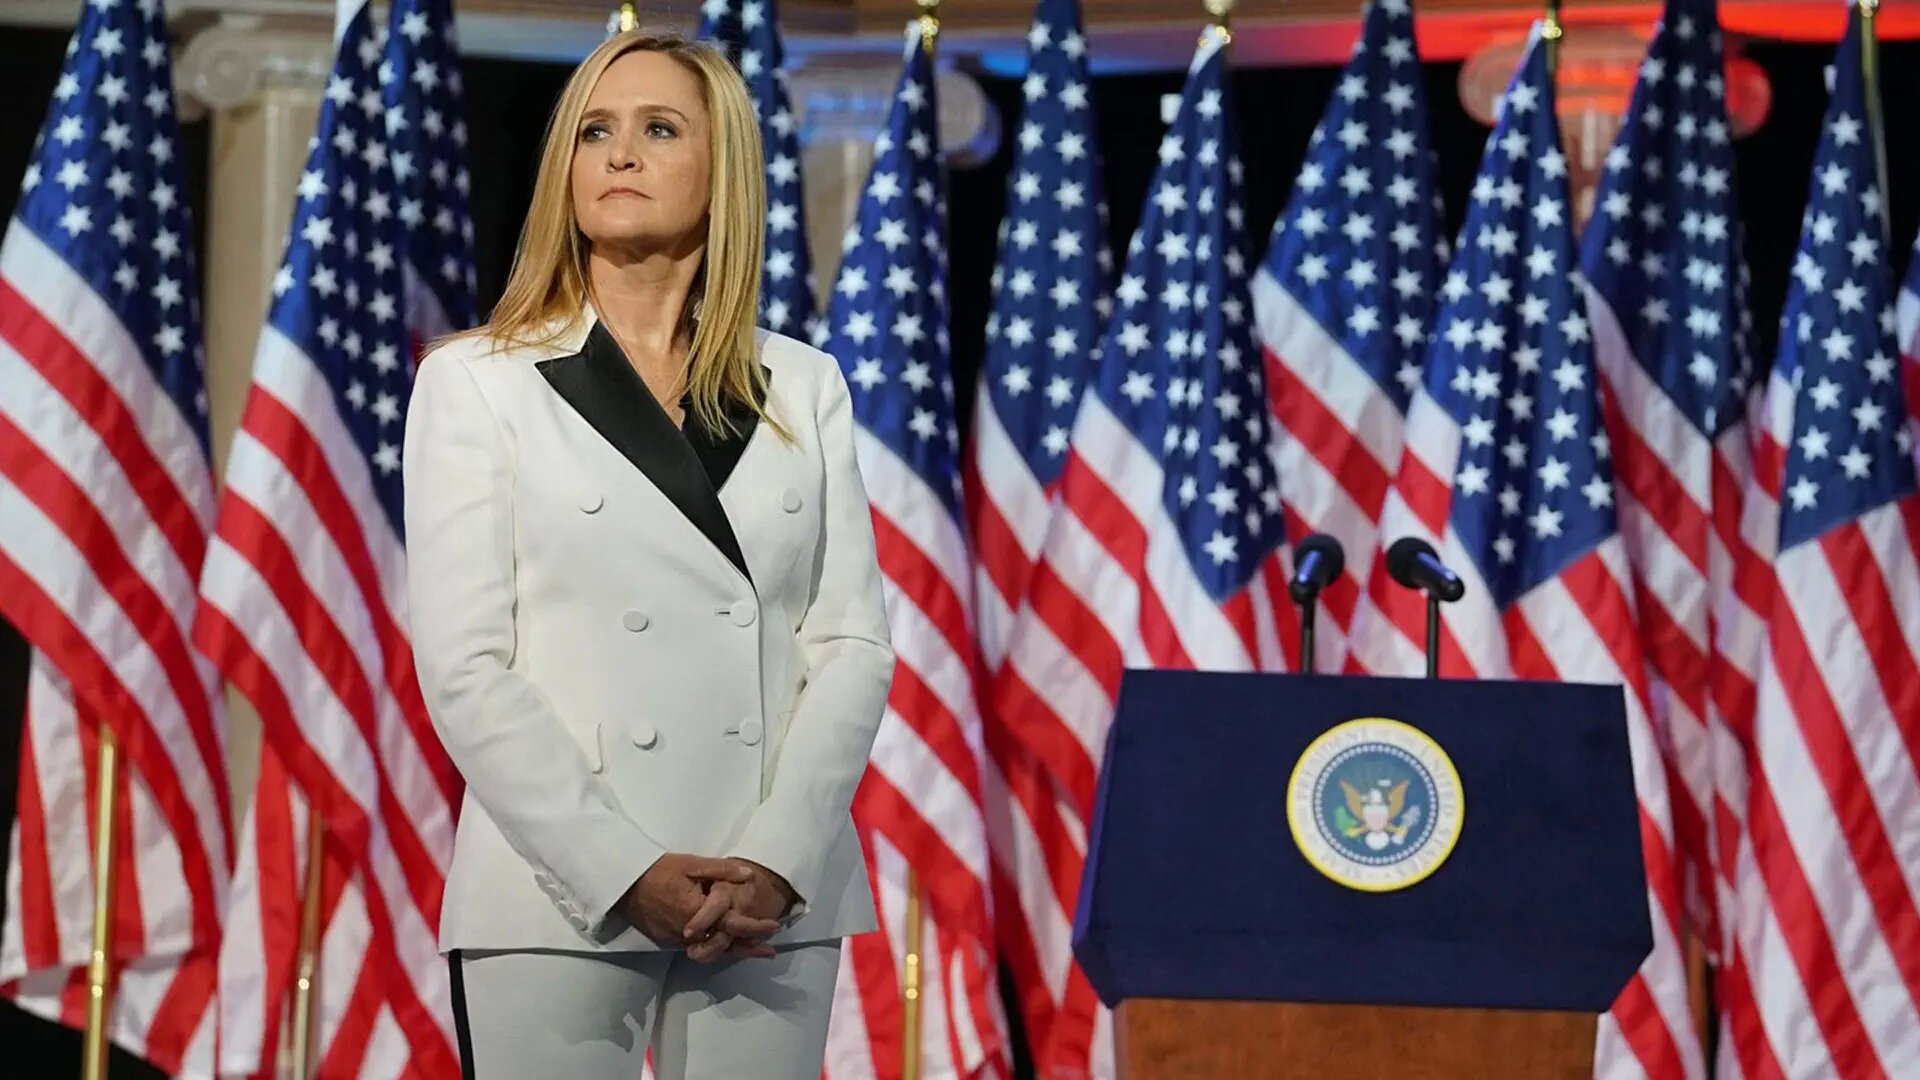 Full Frontal with Samantha Bee S2E7 Not the White House Correspondents' Dinner